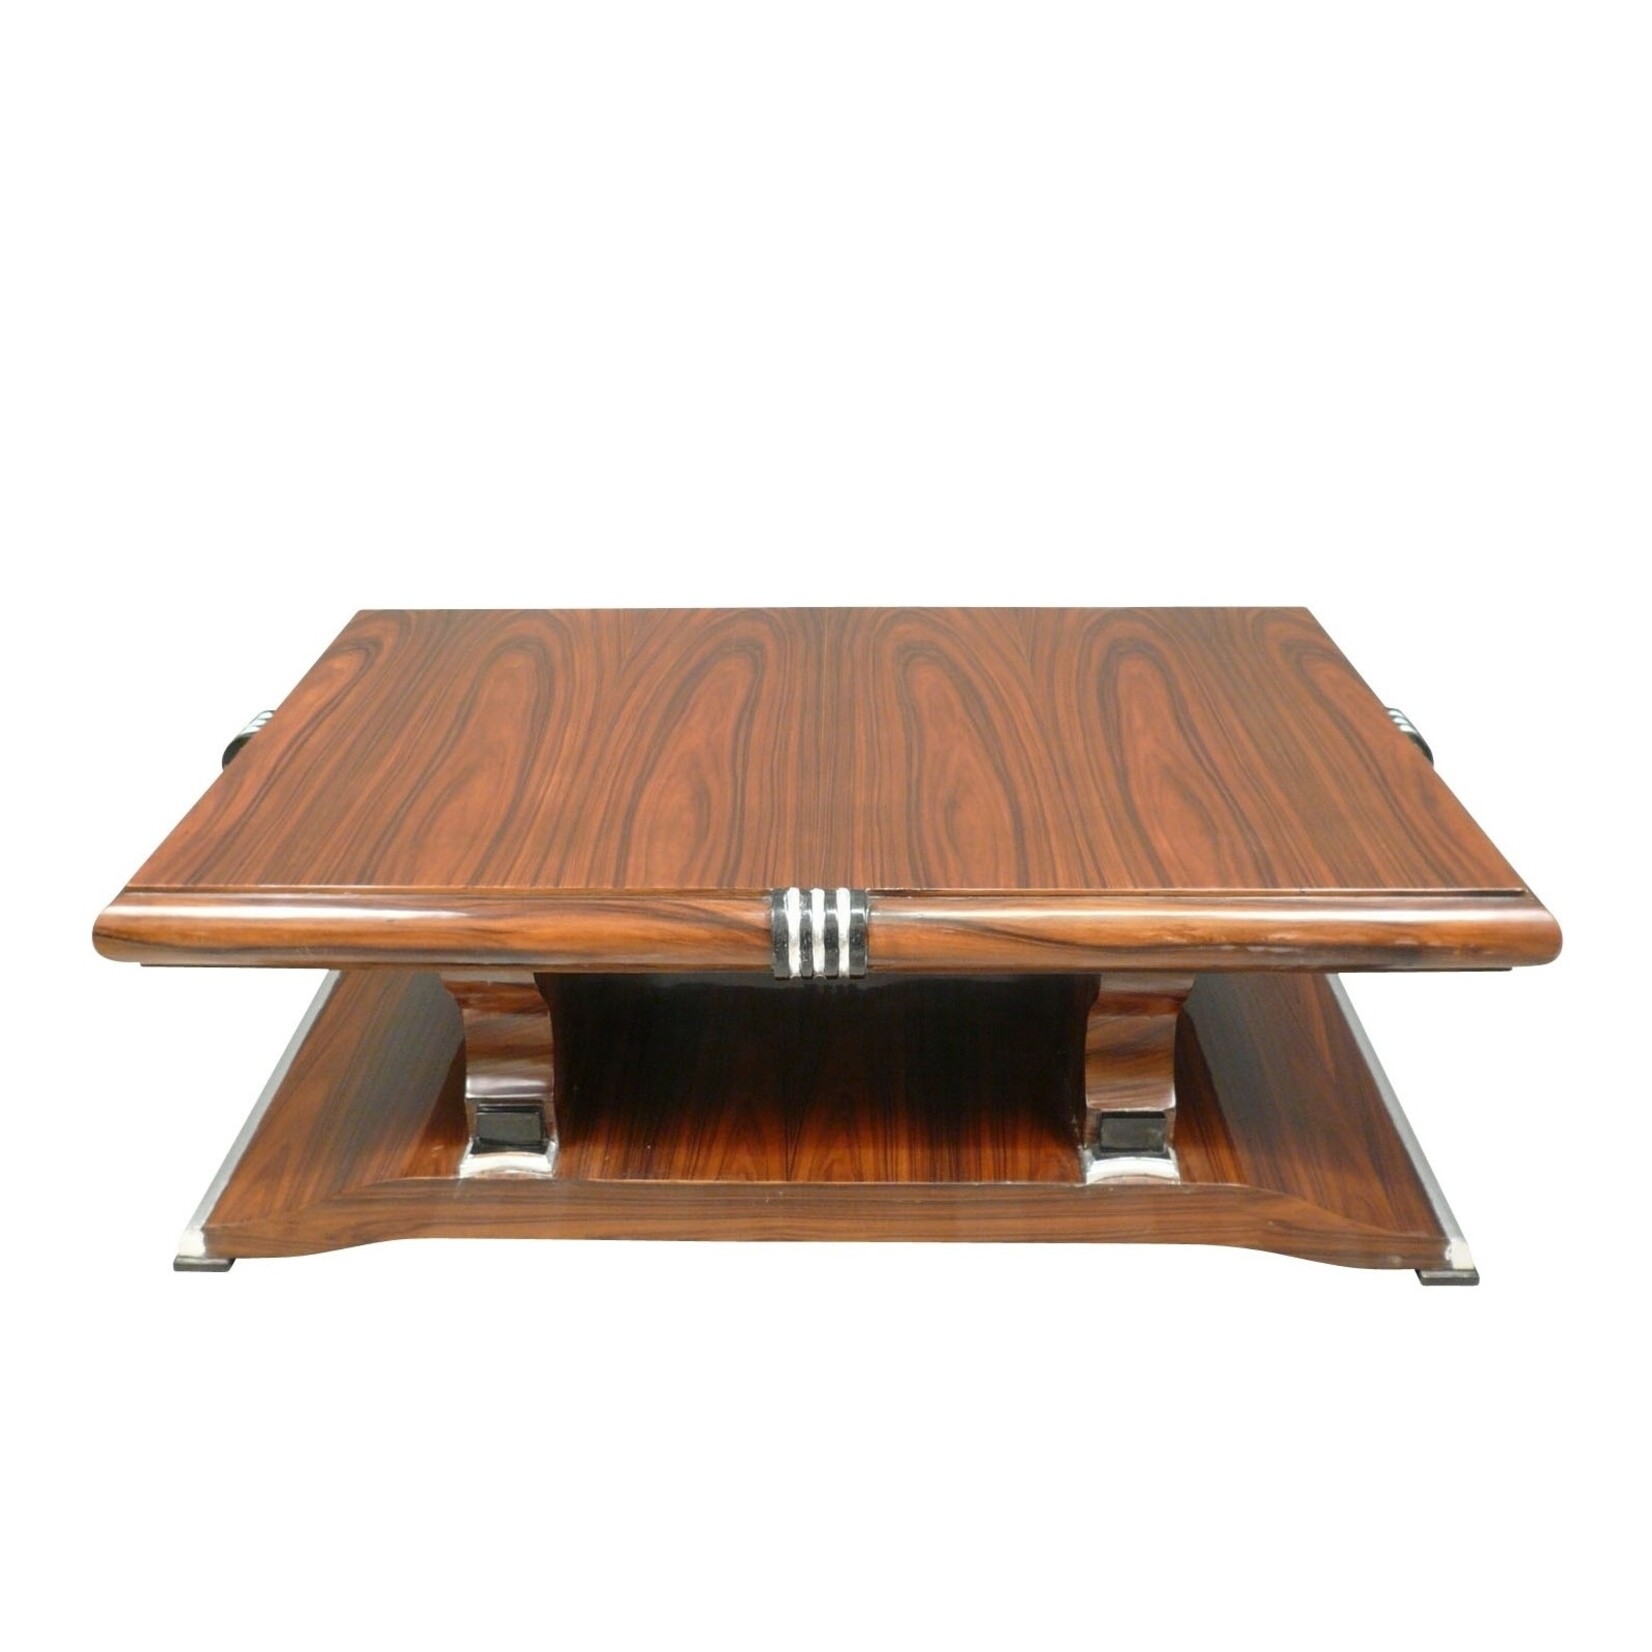 LC Coffee table art deco salon in rosewood marquetry with a length of 122 cm.